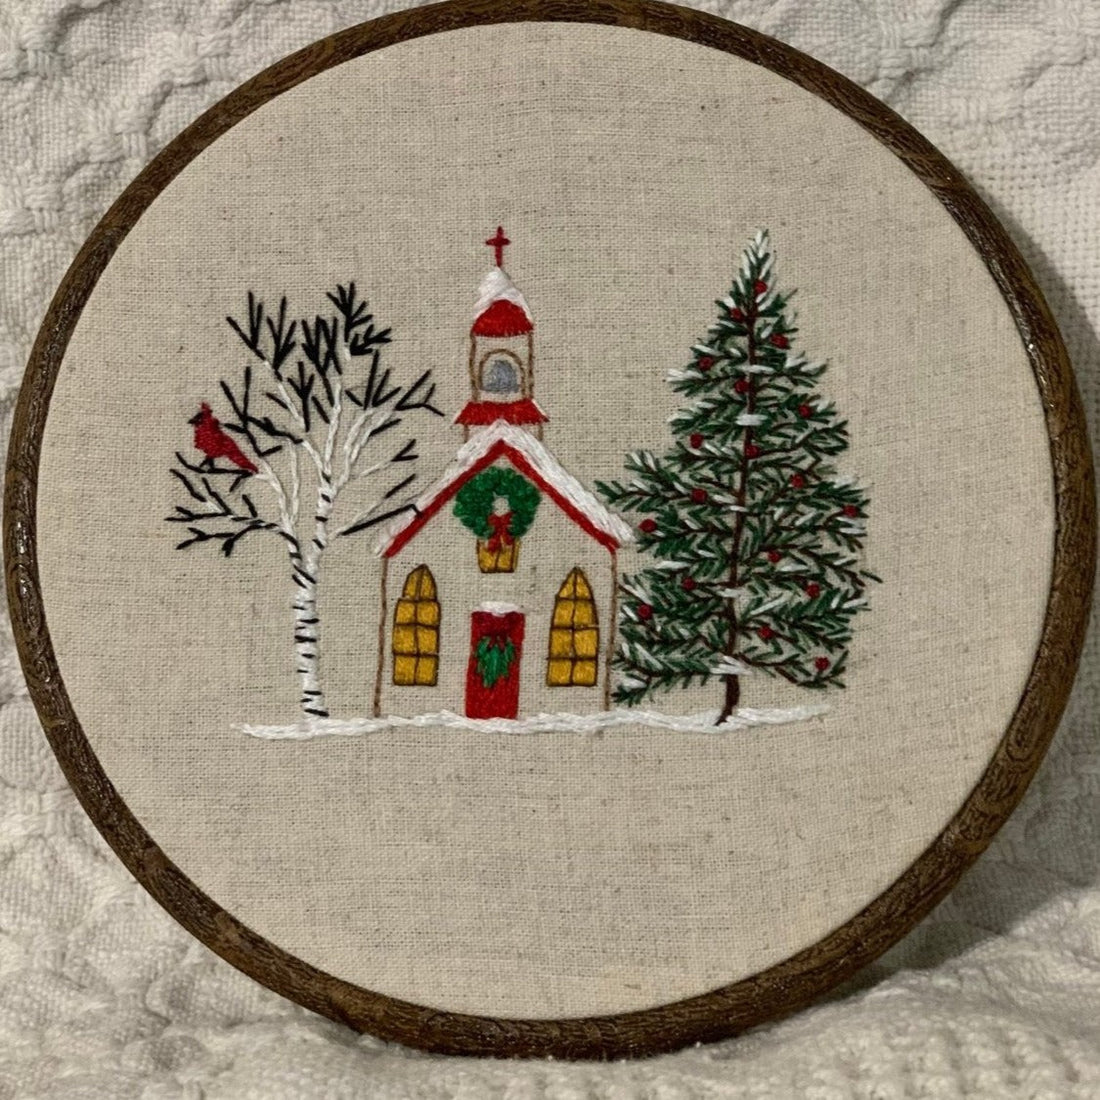 Crafting Winter Magic: Cardinal Embroidery Kit for a Christmassy Delight